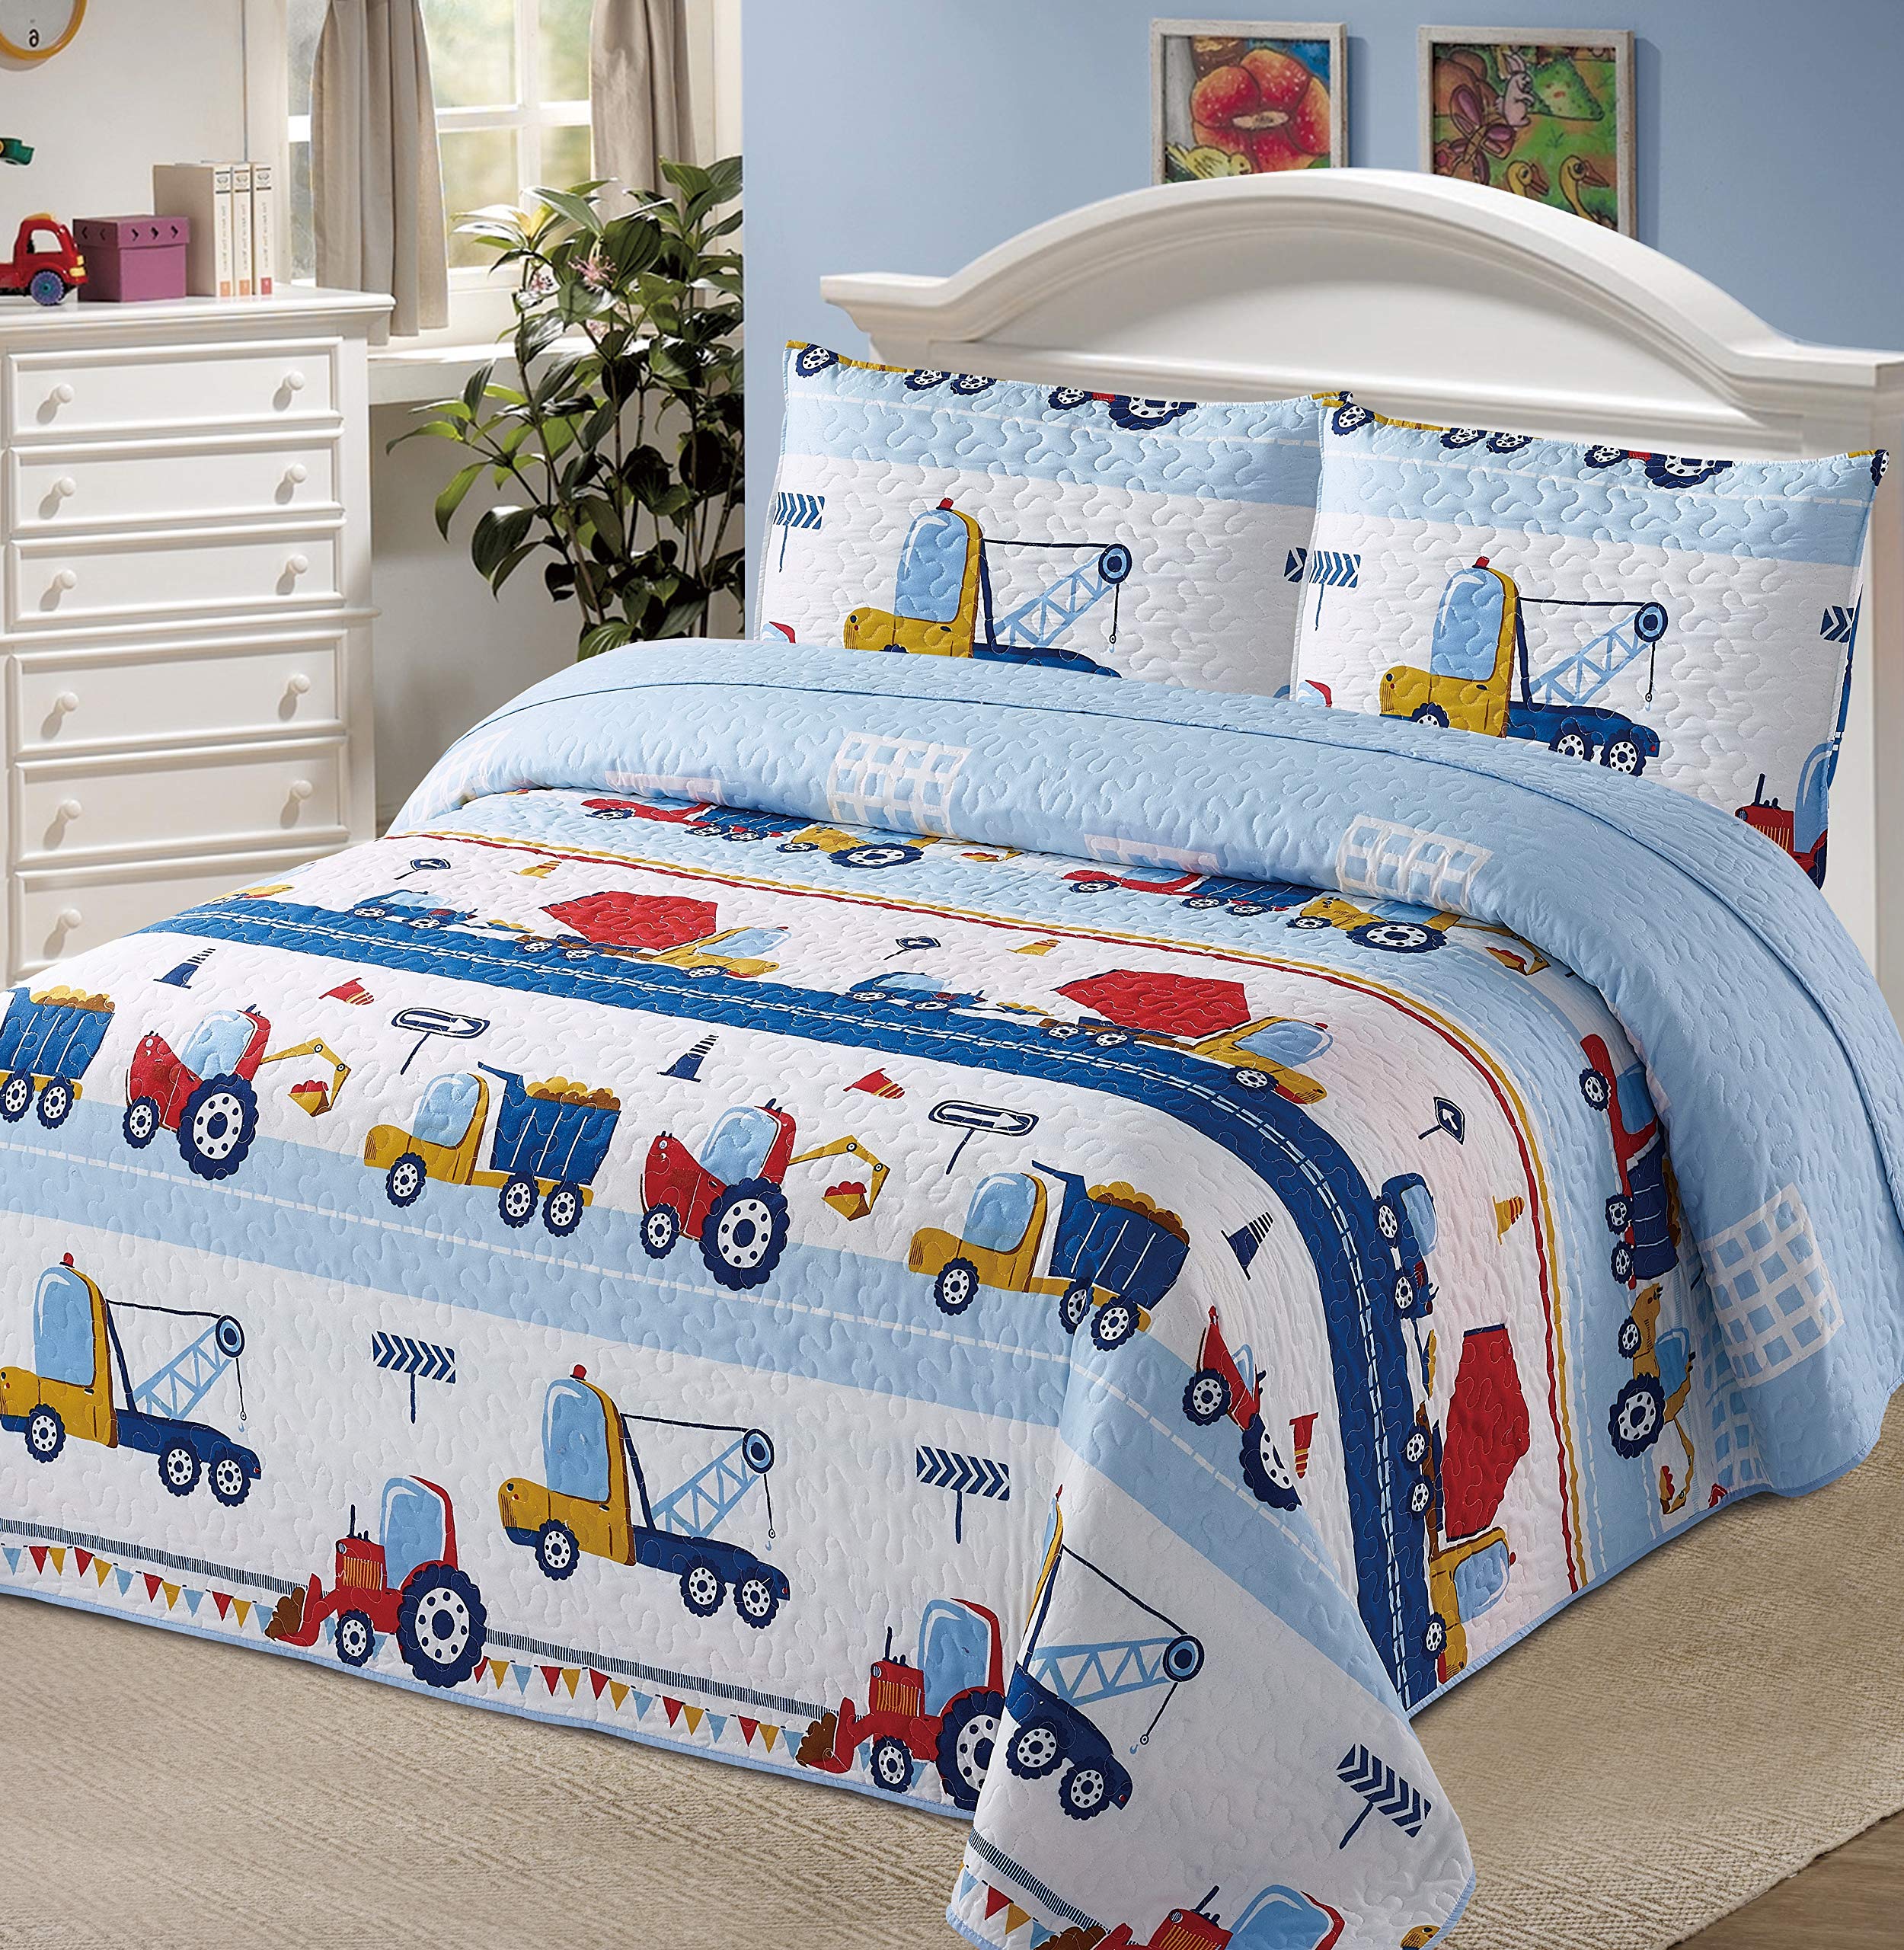 Enhance Your Truck Style With A Bedspread